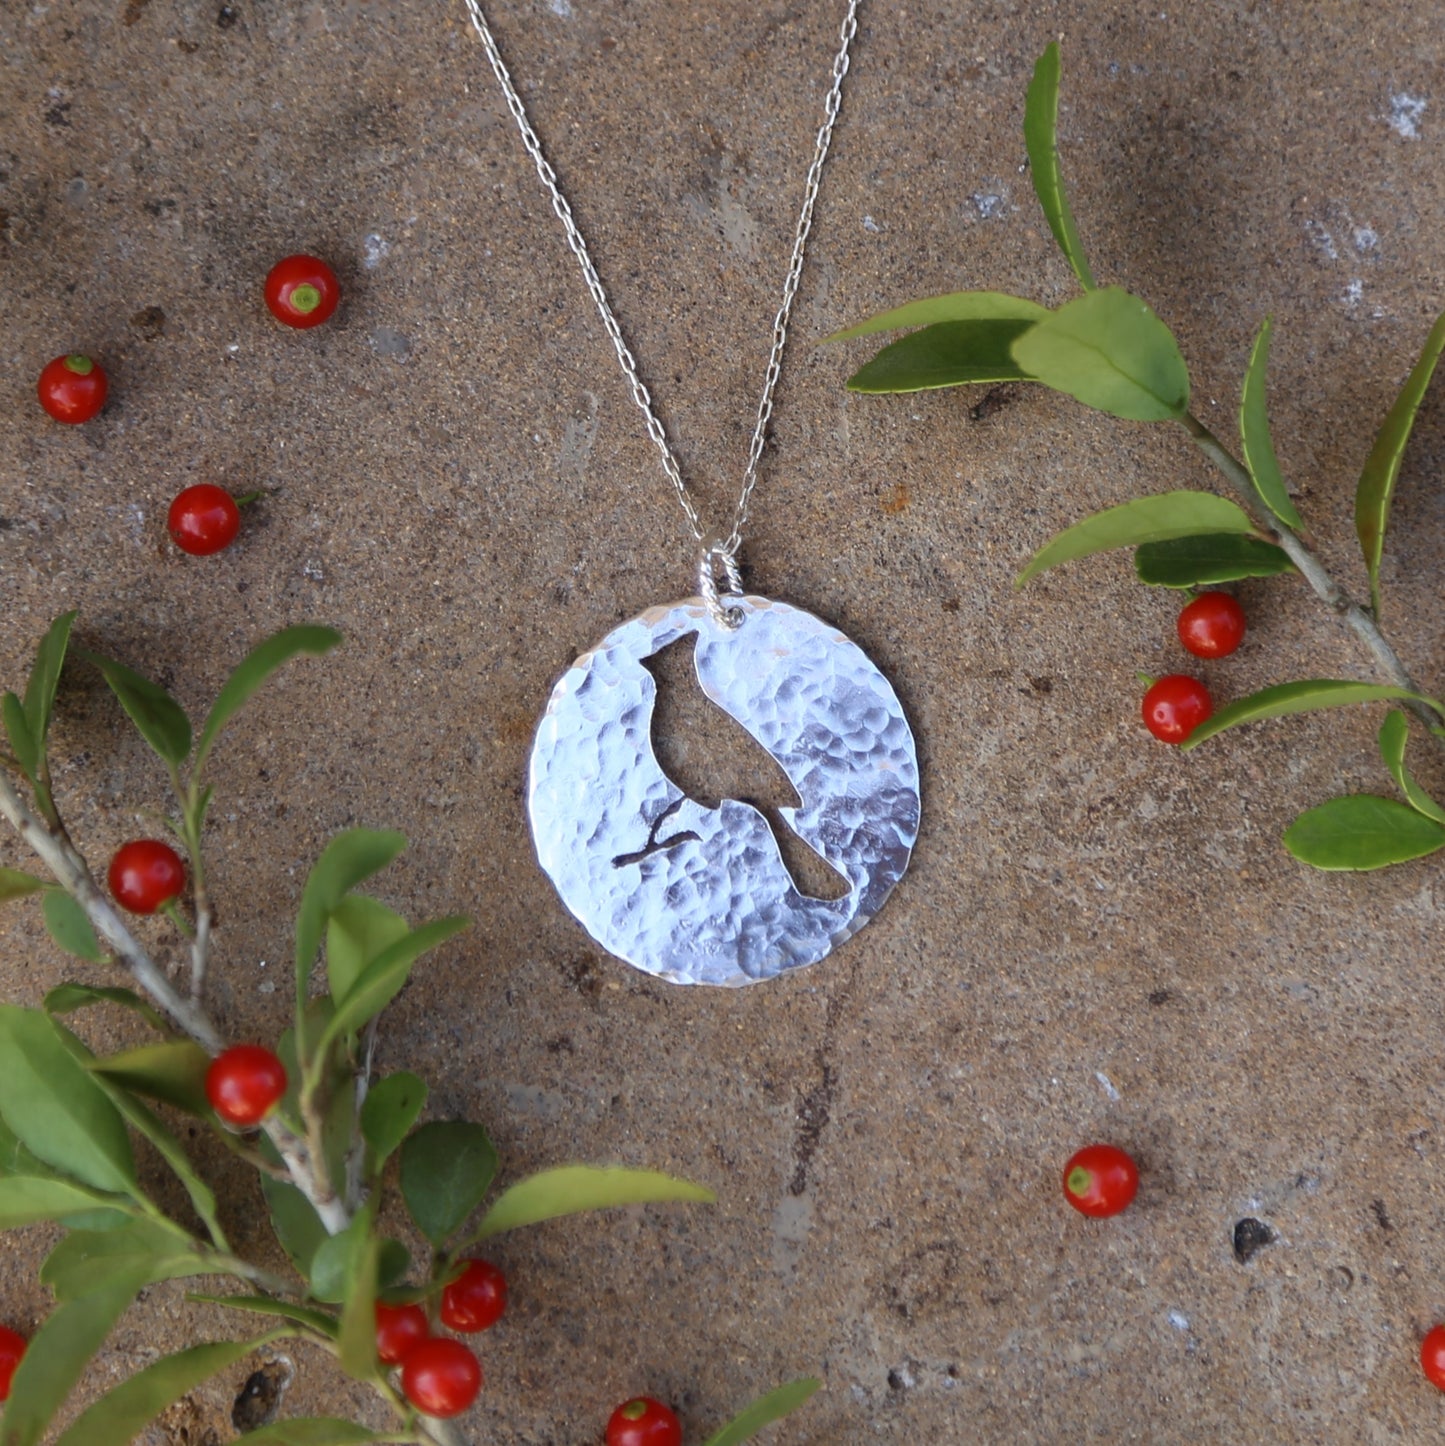 Cardinal Hand-cut and Hammered Circle Sterling Silver Pendant Necklace